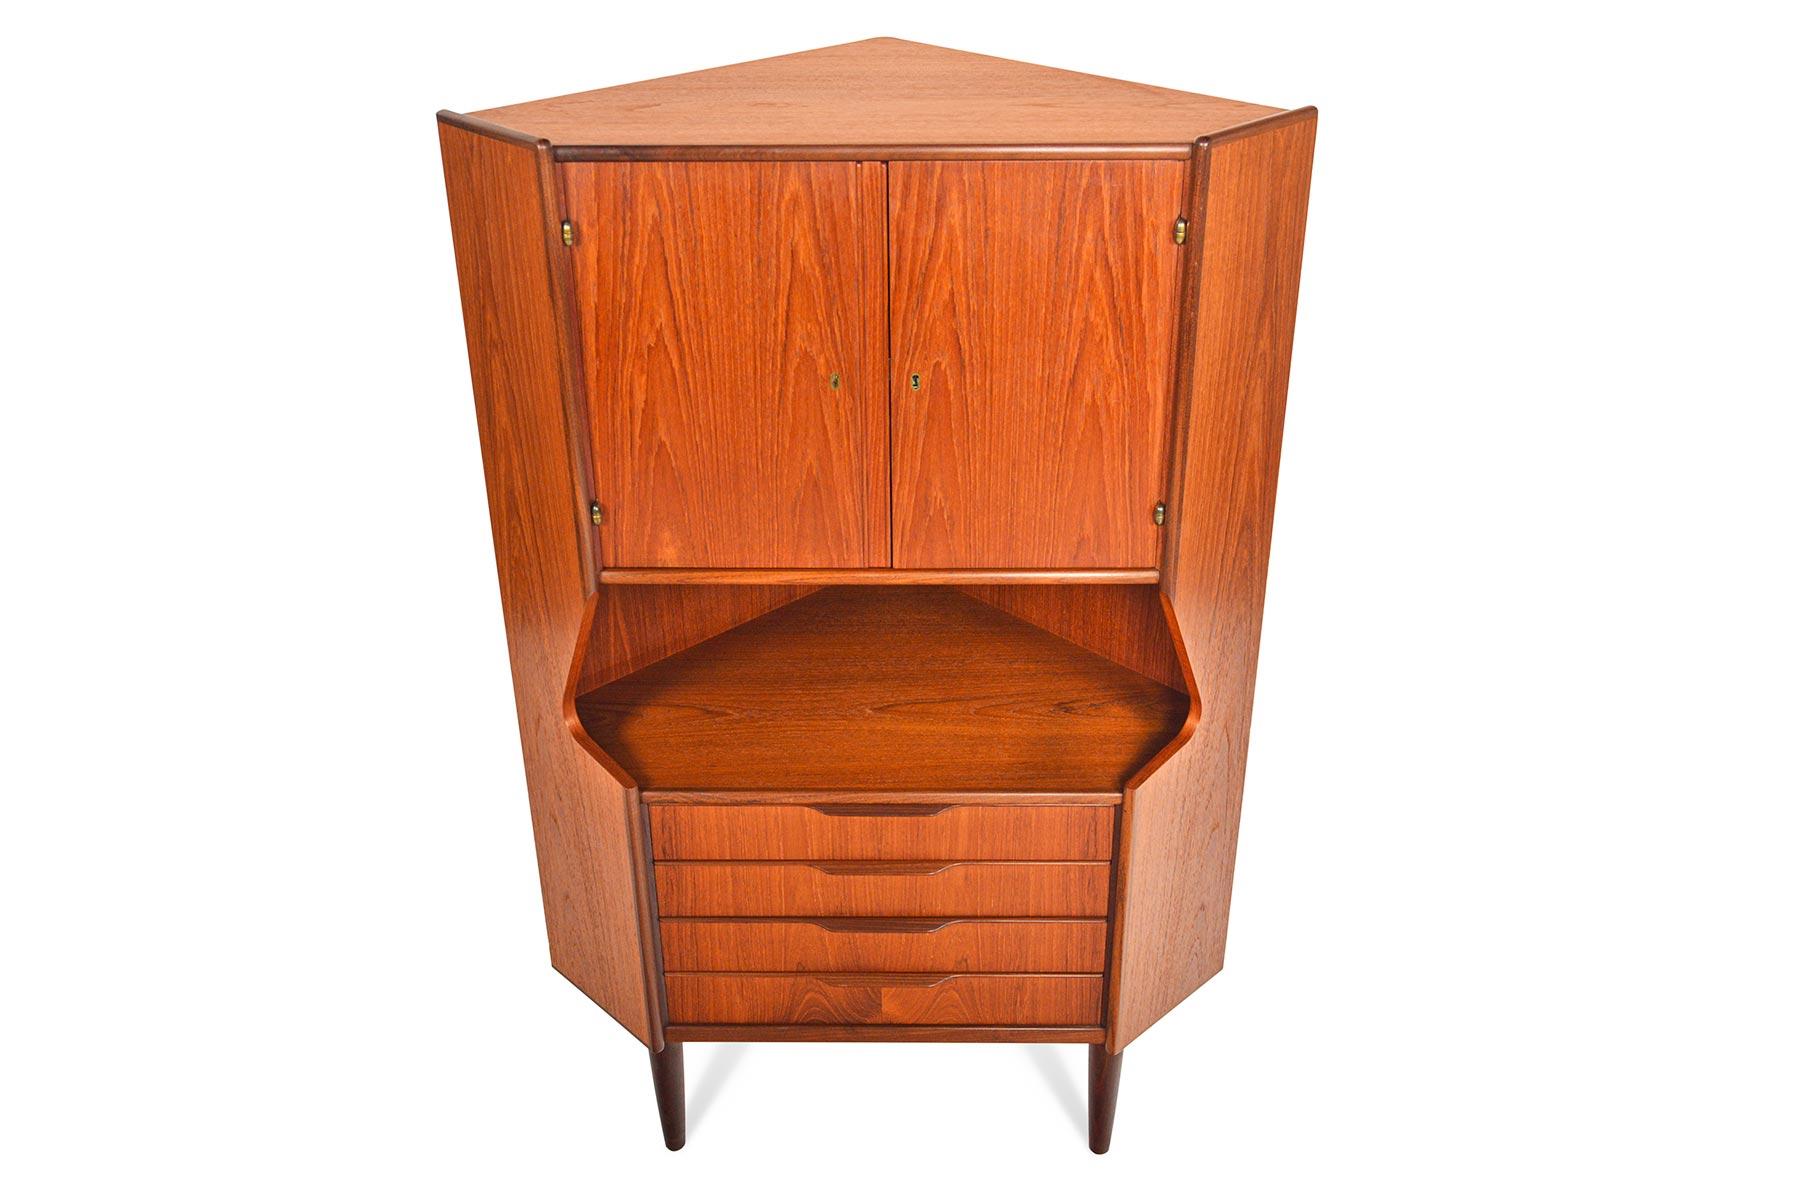 This Danish modern midcentury corner unit offers a tall teak design perfect for storage and display. The top cabinet unlocks to reveal a mirror lined bar with rosewood shelves. Beneath is a cubby and four small drawers. In excellent original